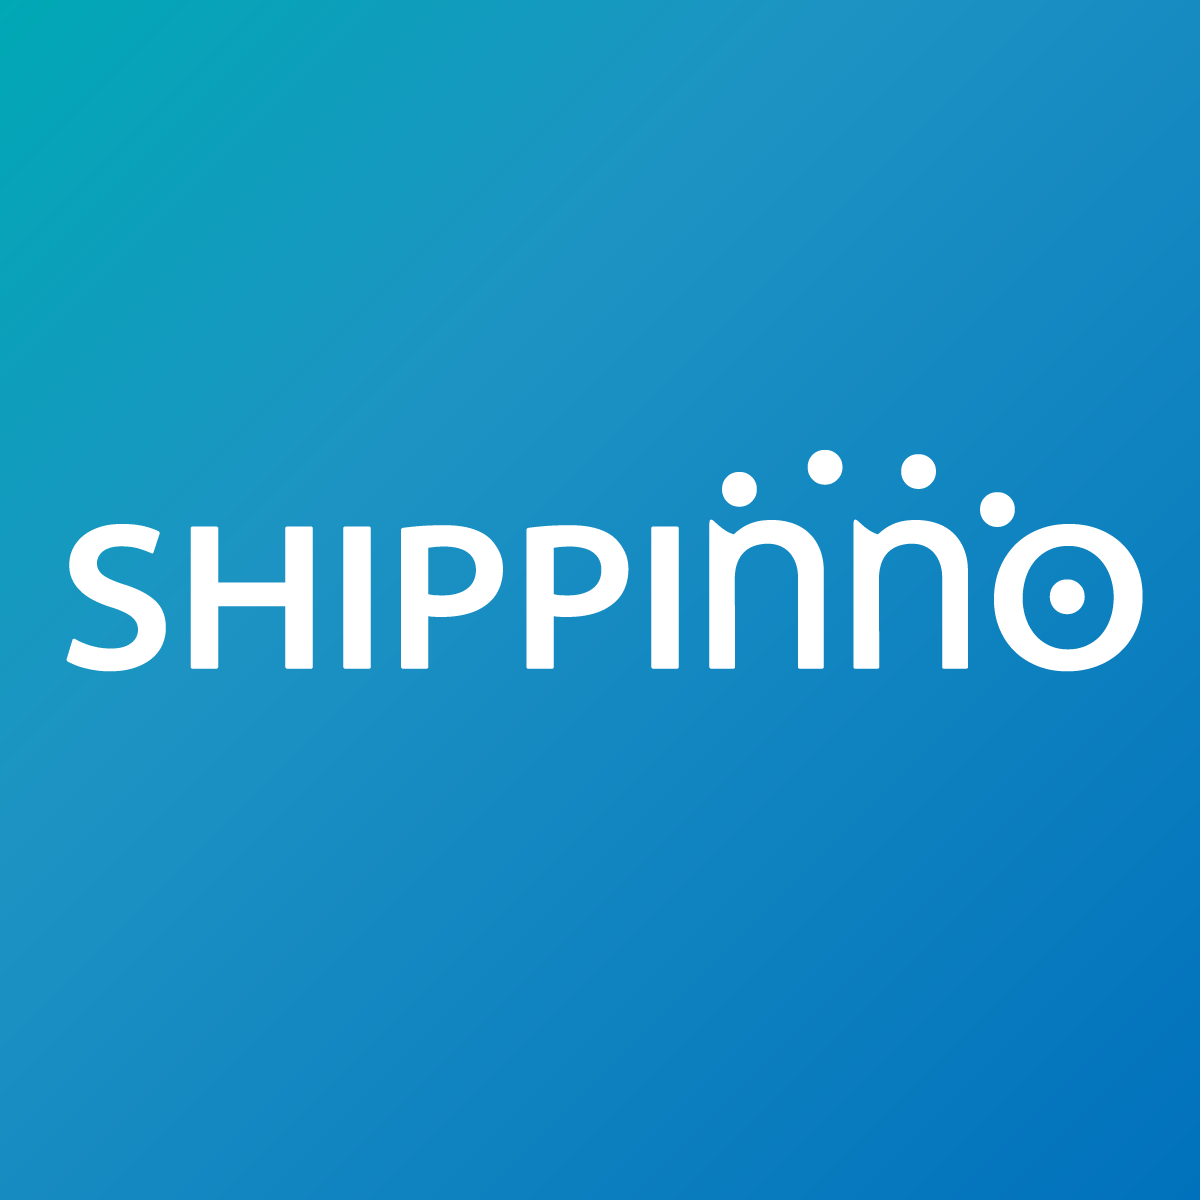 Hire Shopify Experts to integrate shippinno app into a Shopify store